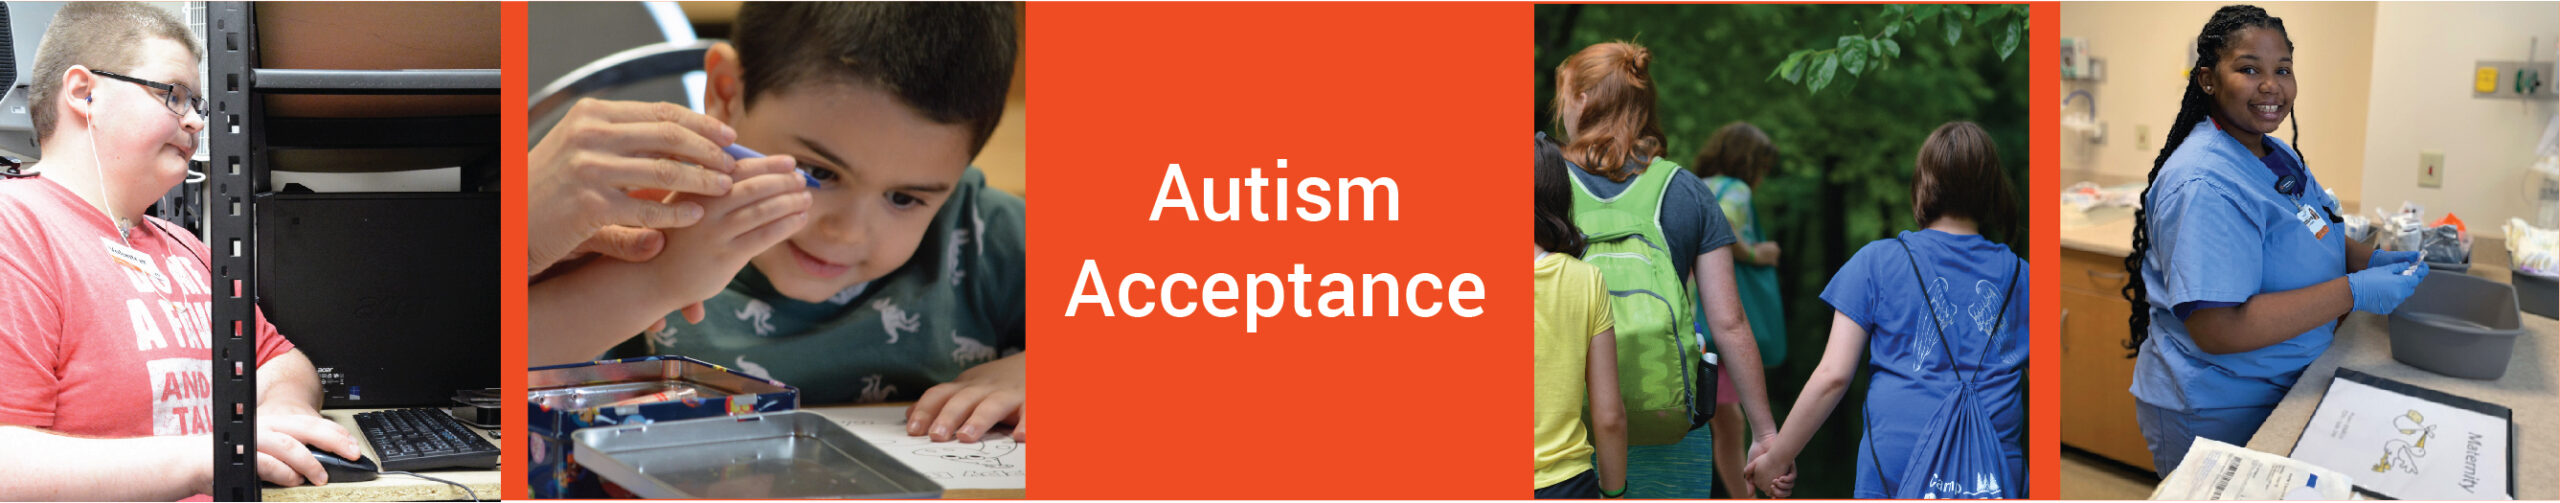 images of people with words autism acceptance